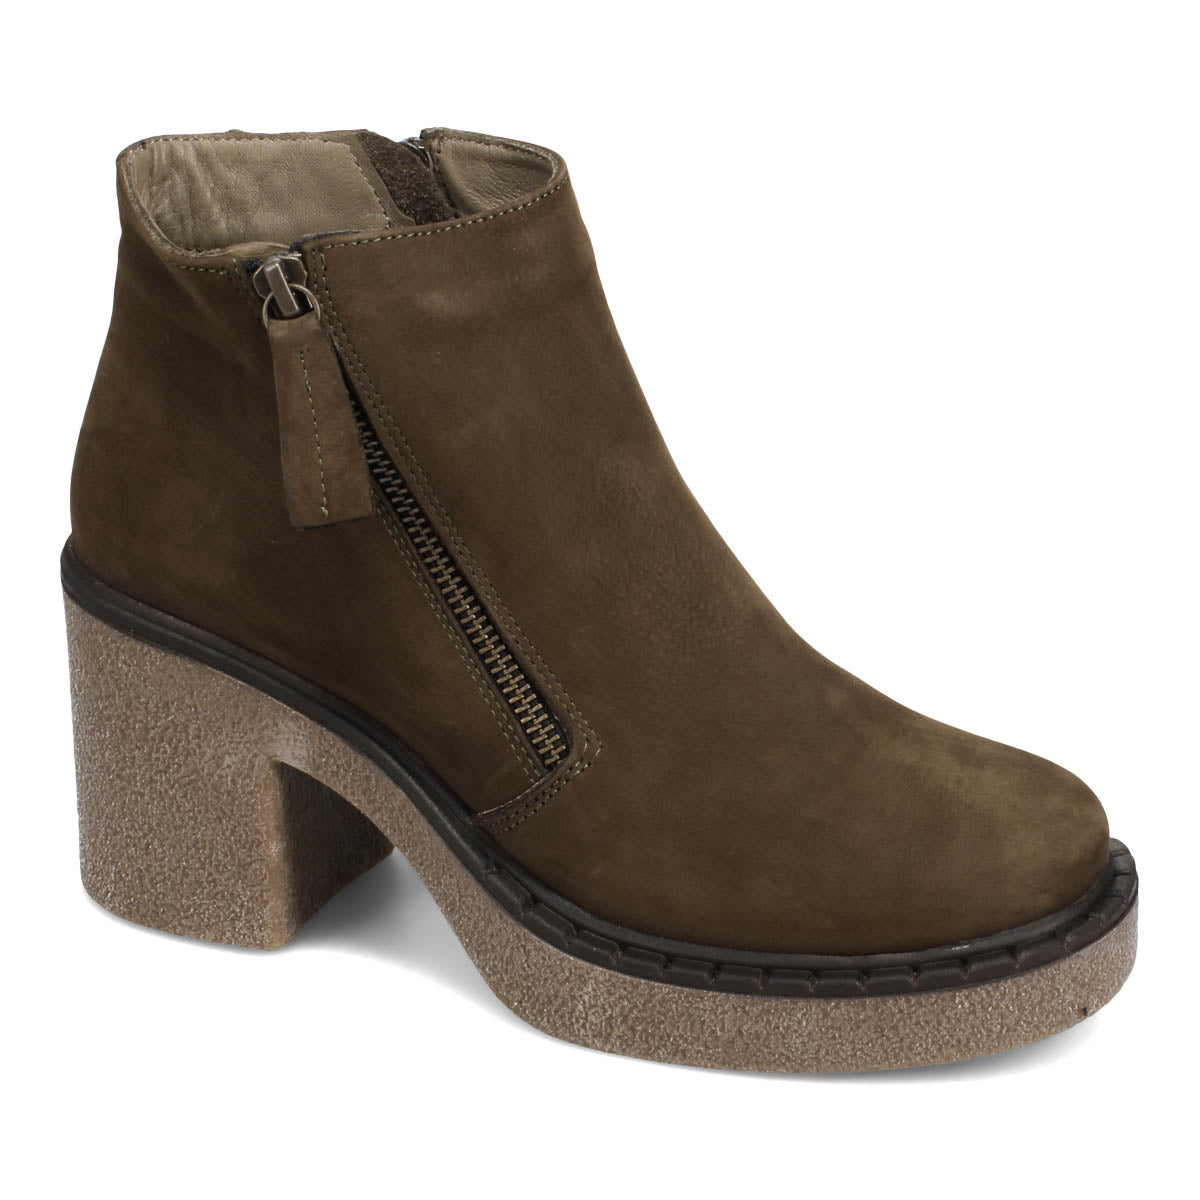 Bueno Leather Ankle Boots Phoenix, 59% OFF